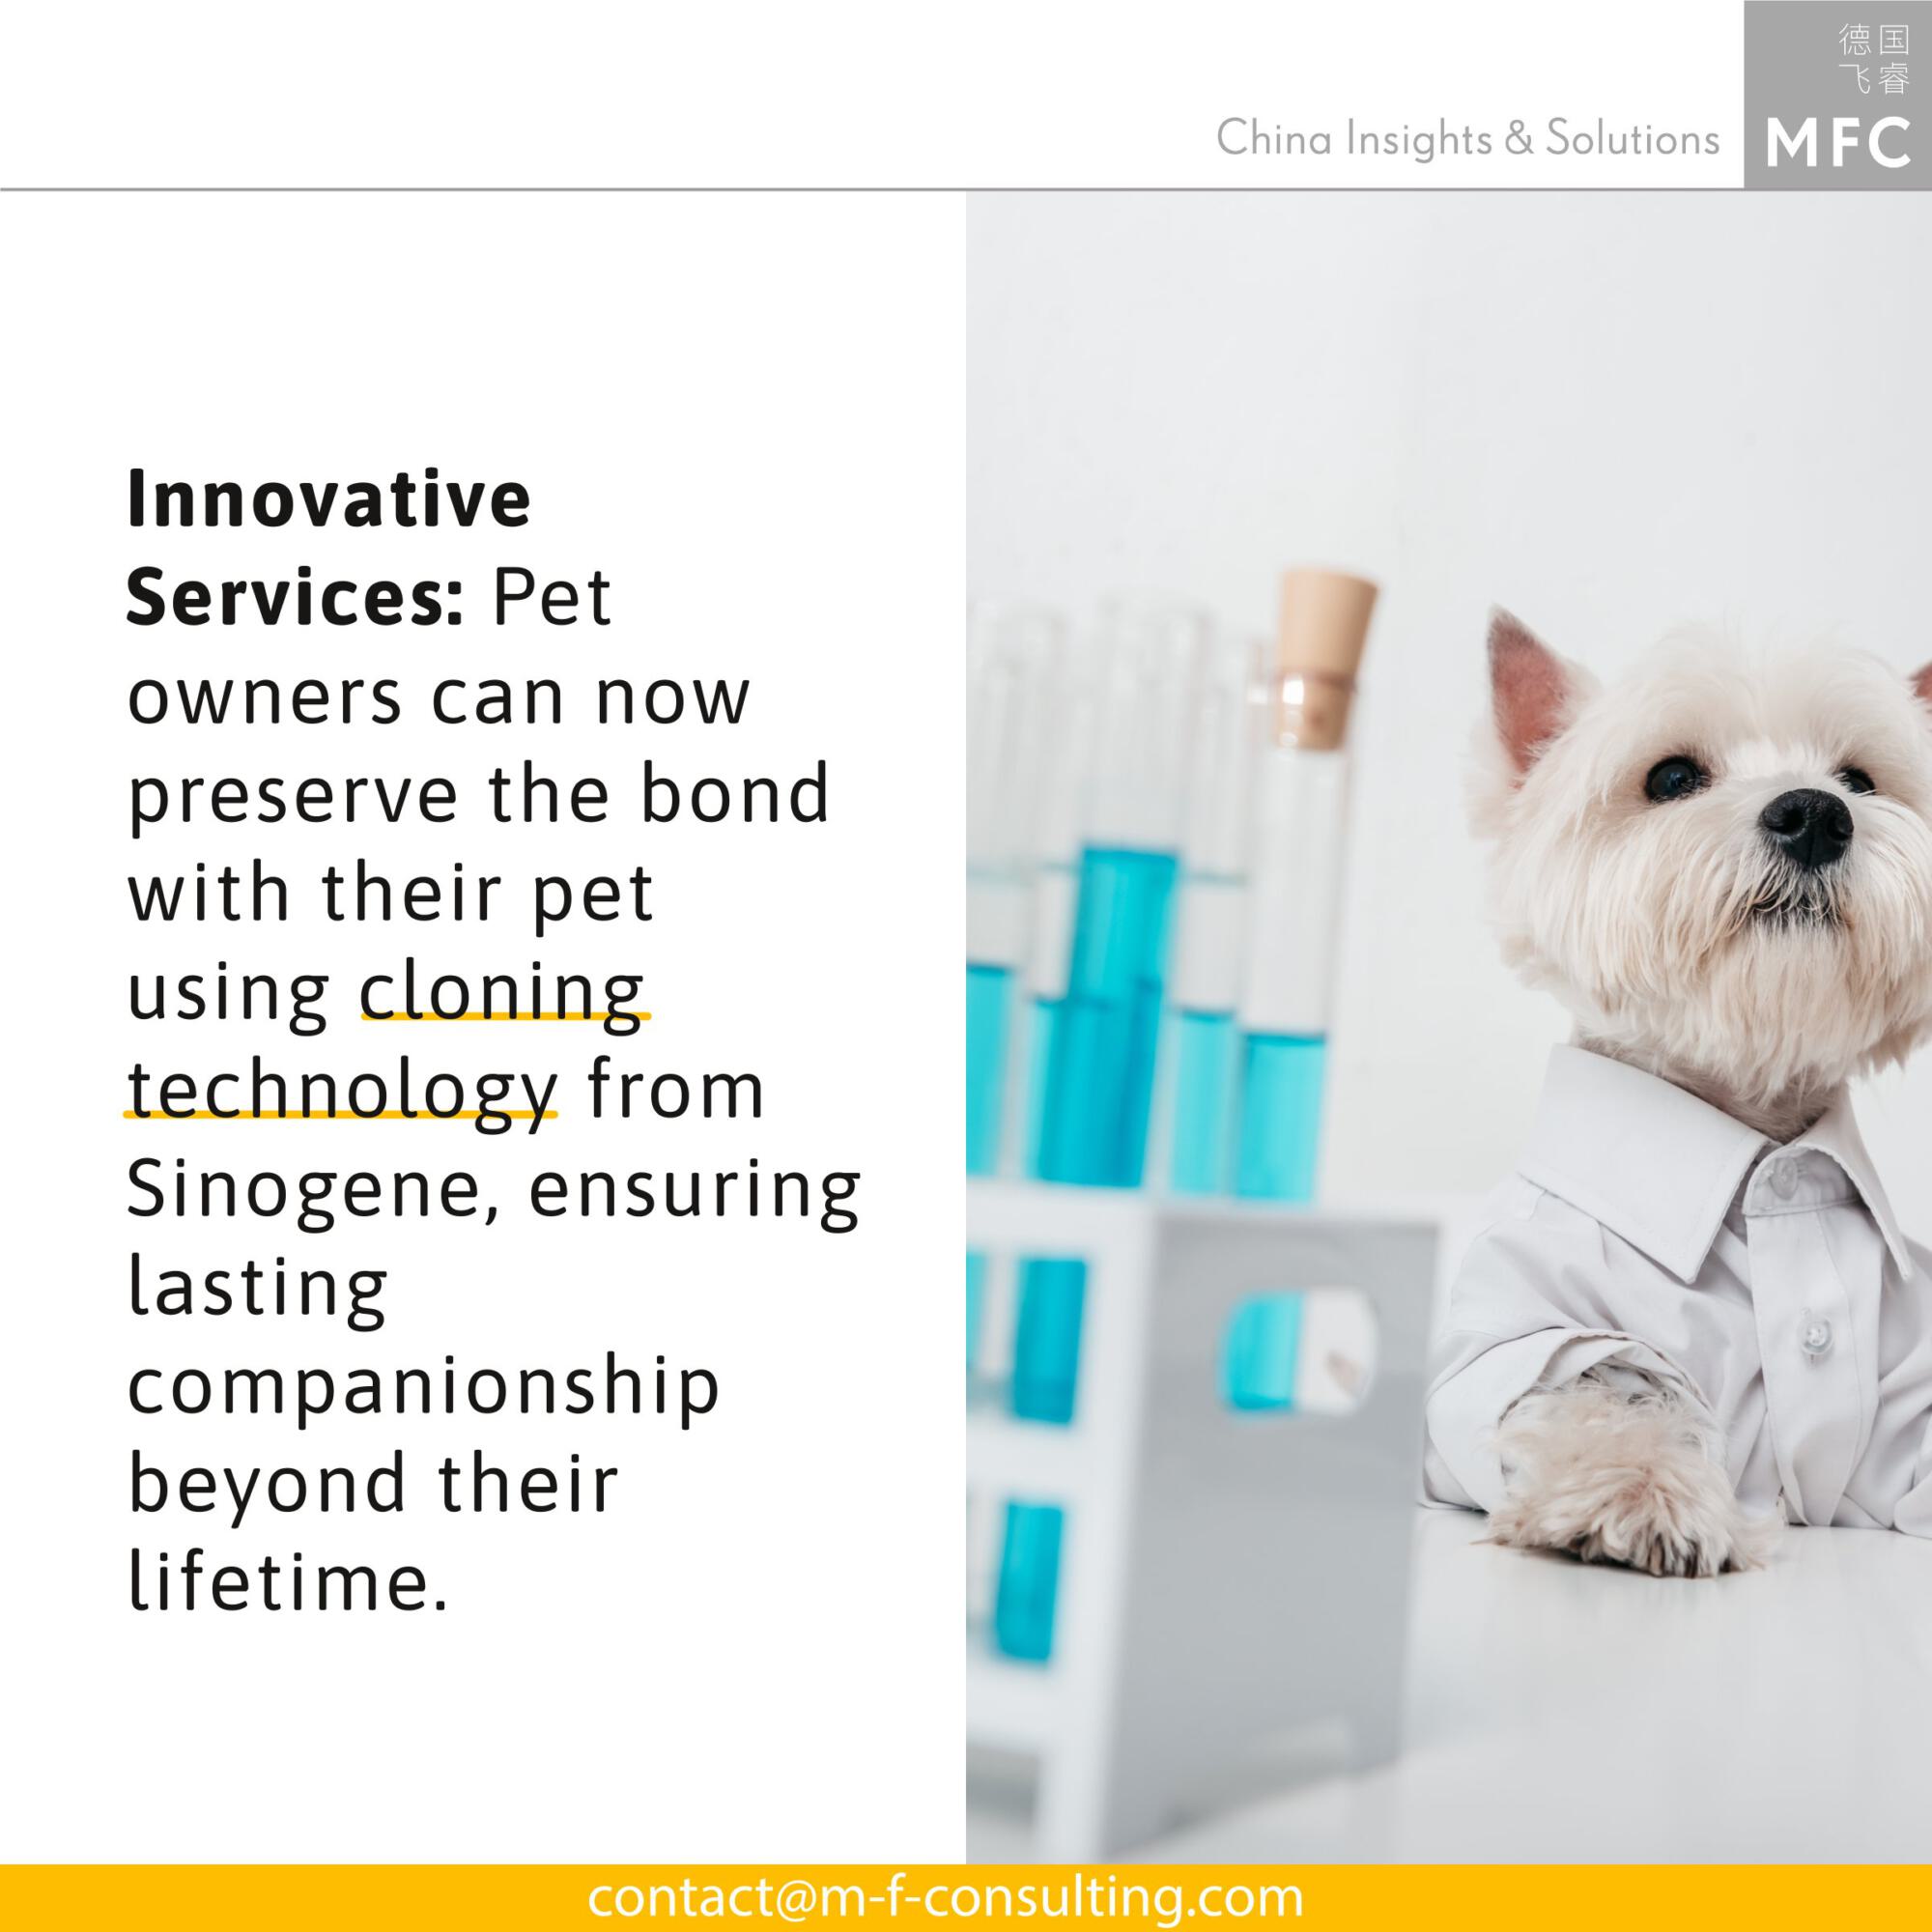 China's pet industry: innovative services - pet owners can now preserve the bond with their pet using cloning technology from Sinogene, ensuring lasting companionship beyond their lifetime.